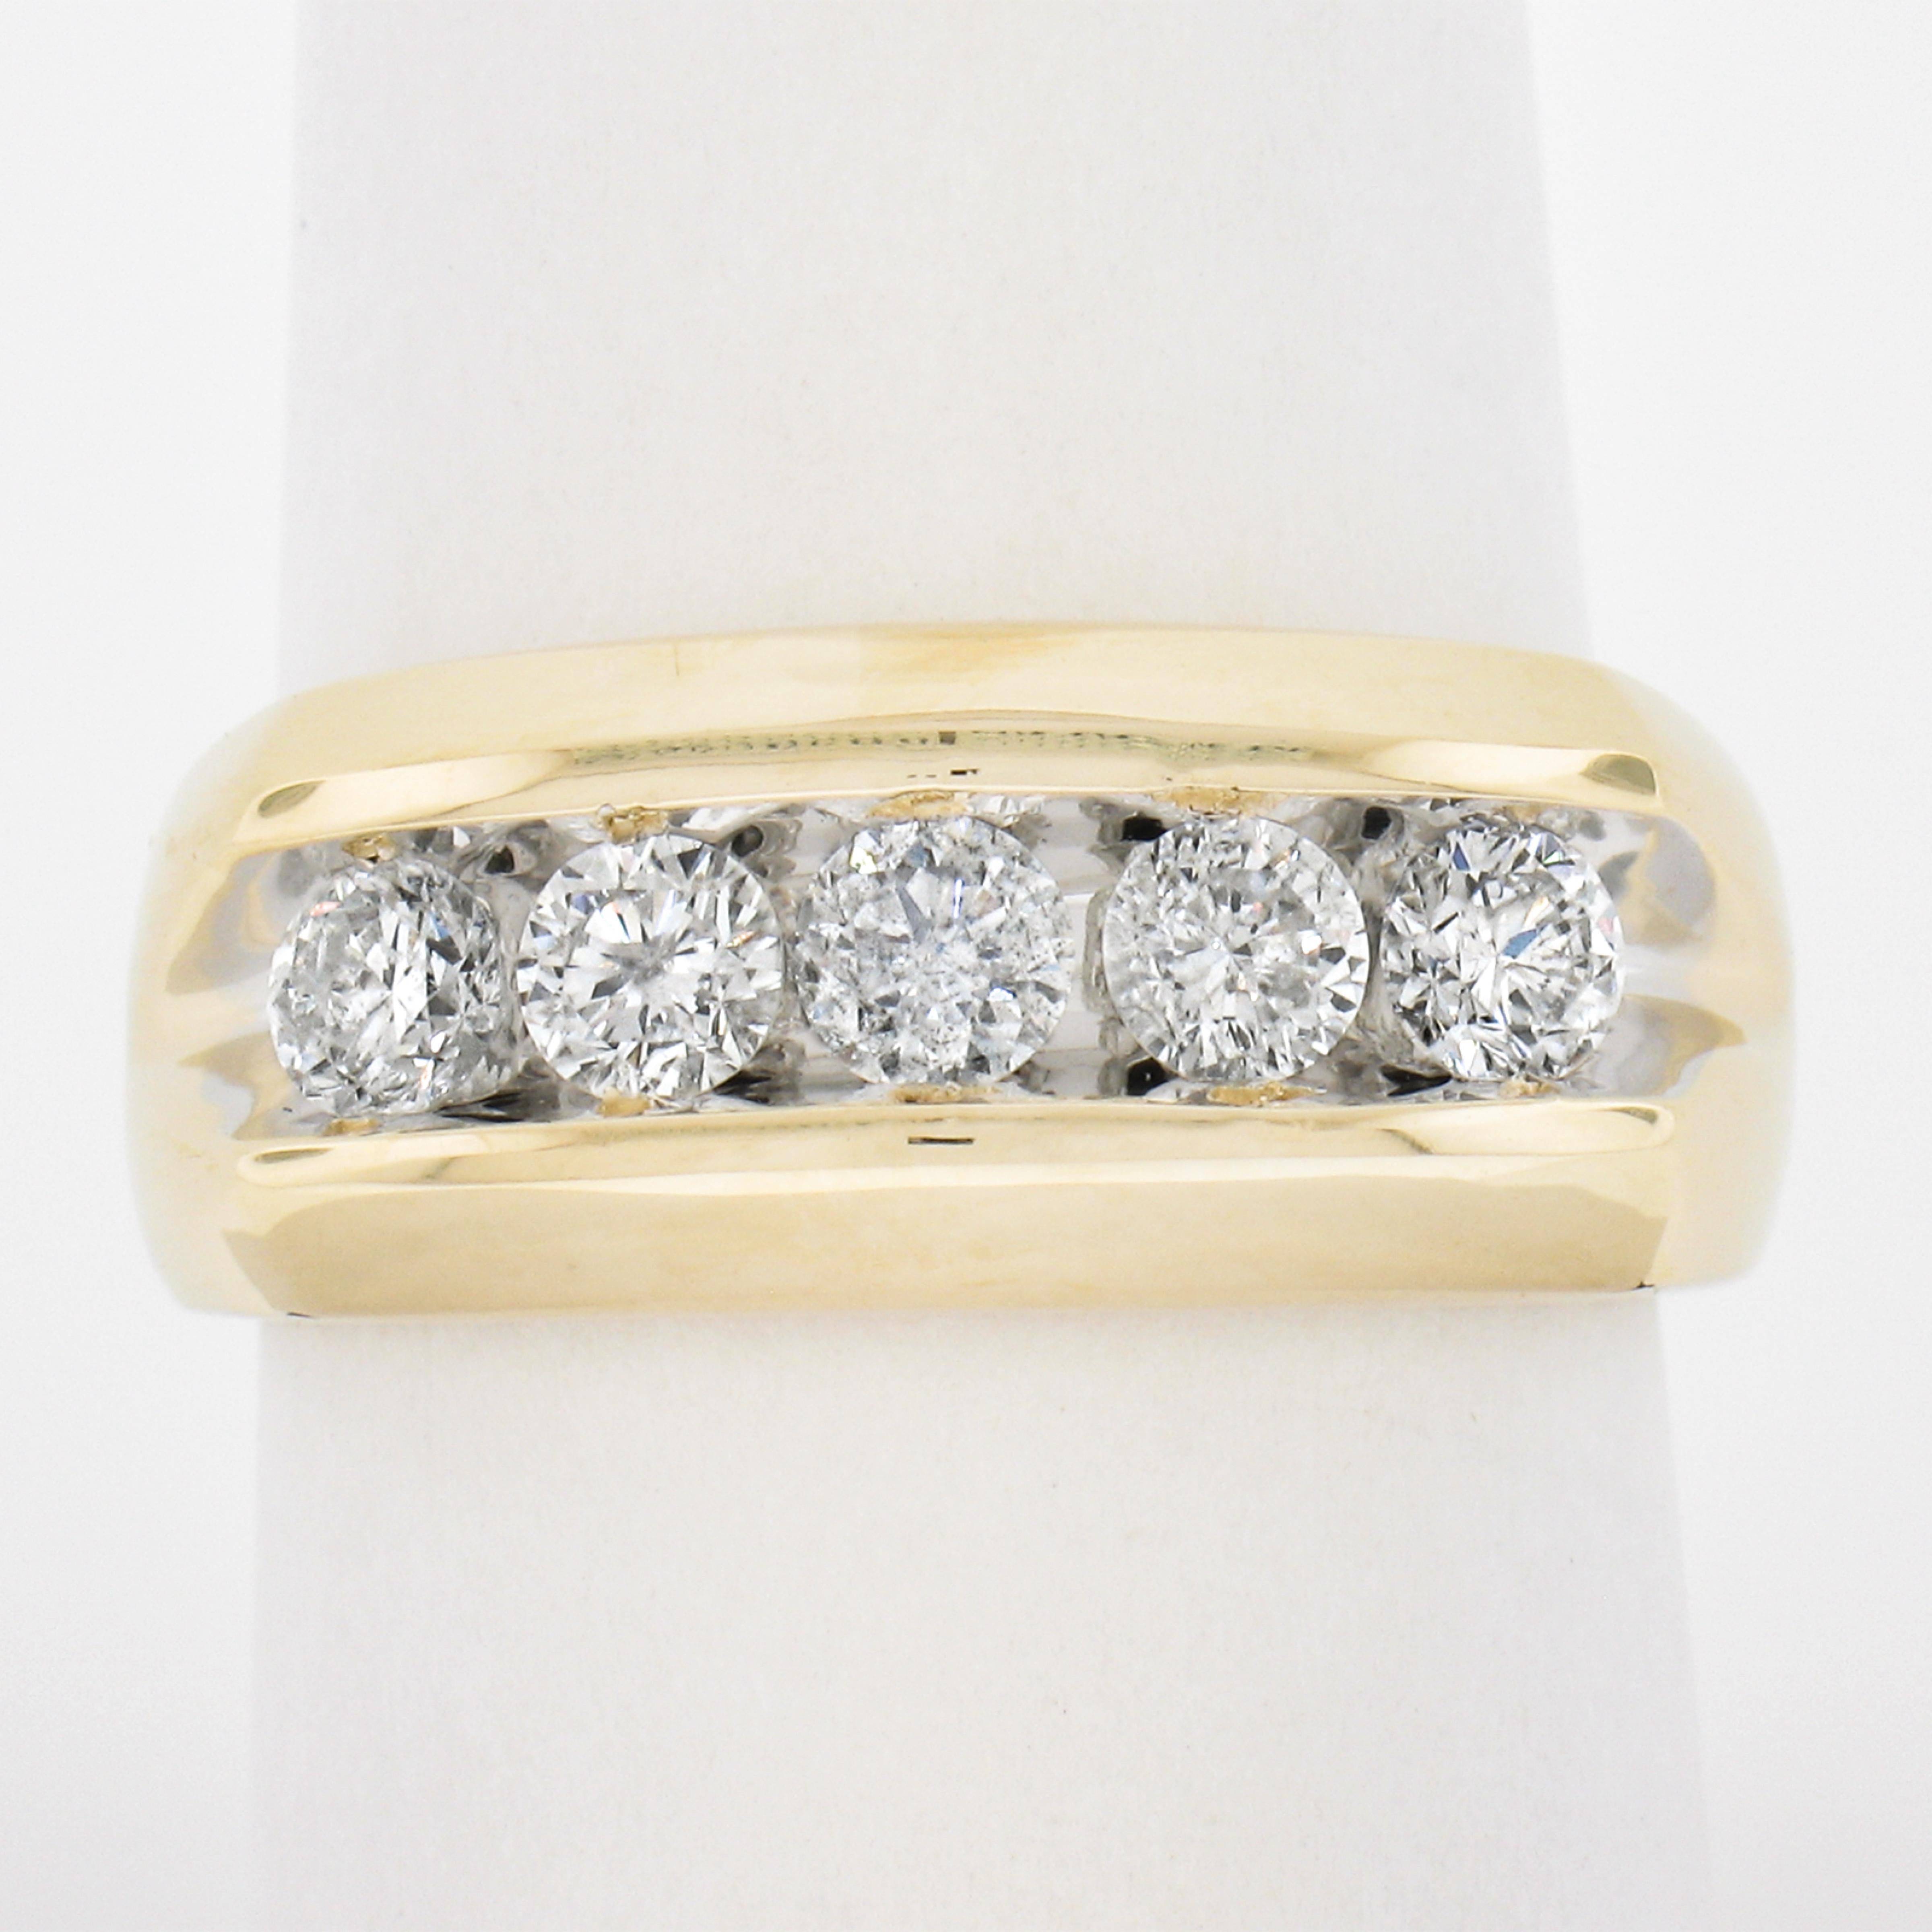 --Stone(s):--
(5) Natural Genuine Diamonds - Round Brilliant Cut - Channel Set - G/H Color - SI2-I2 Clarity 
Total Carat Weight:	1.00 (approx.)

Material: 14K Solid Yellow Gold
Weight: 8.11 Grams
Ring Size: 8.5 (Fitted on a finger. We can custom